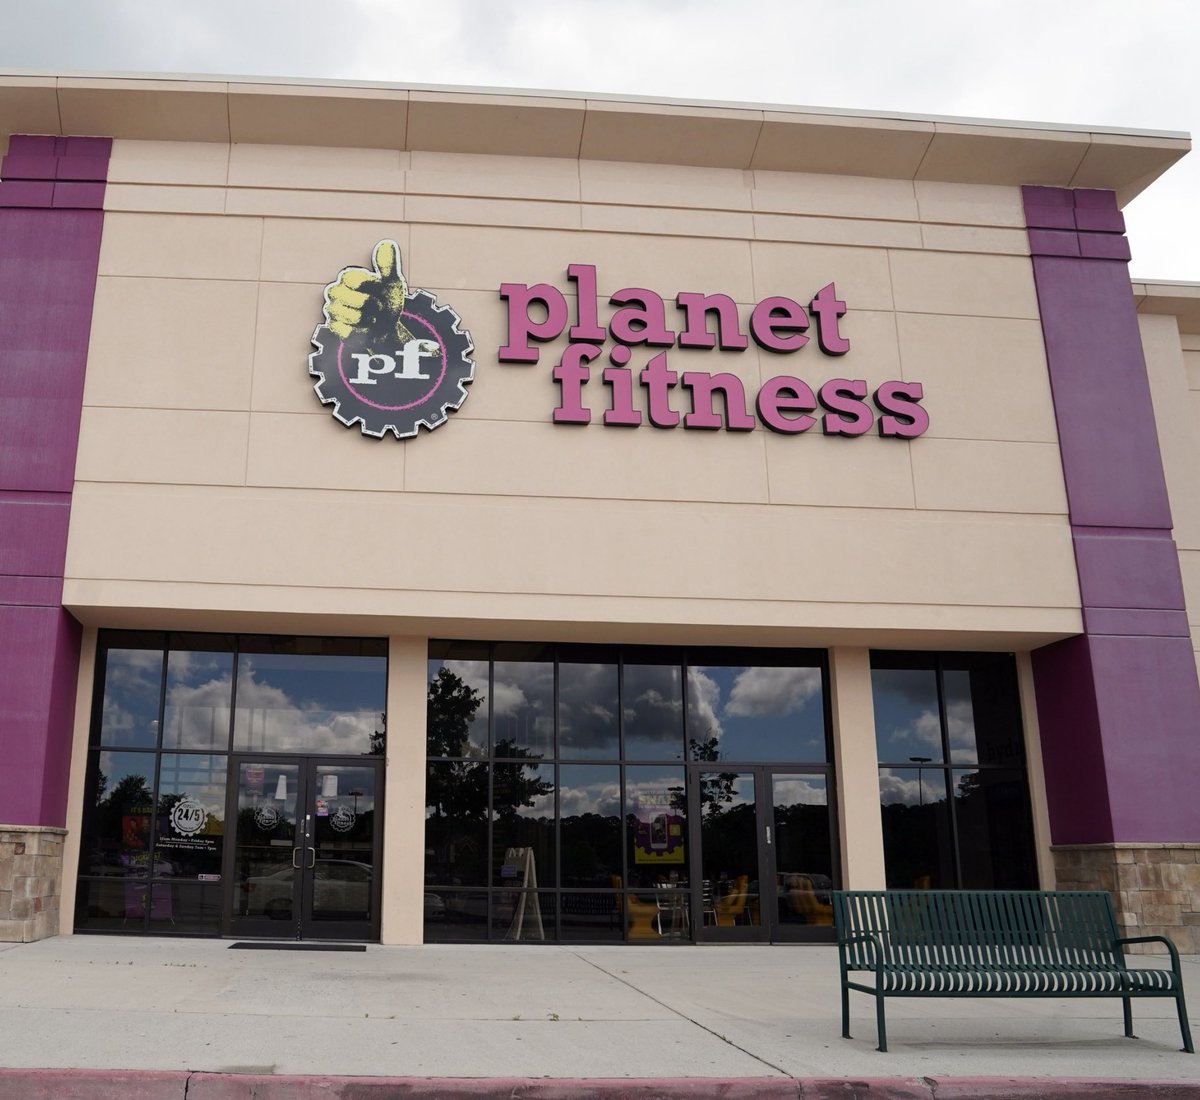 Wow. Planet Fitness is raising their prices for the first time since 1998. “The company reported weaker than expected first quarter revenue.”

Women don’t feel safe in PF. Their policies allow grown men to use the female locker rooms with women and girls. If a woman complains,